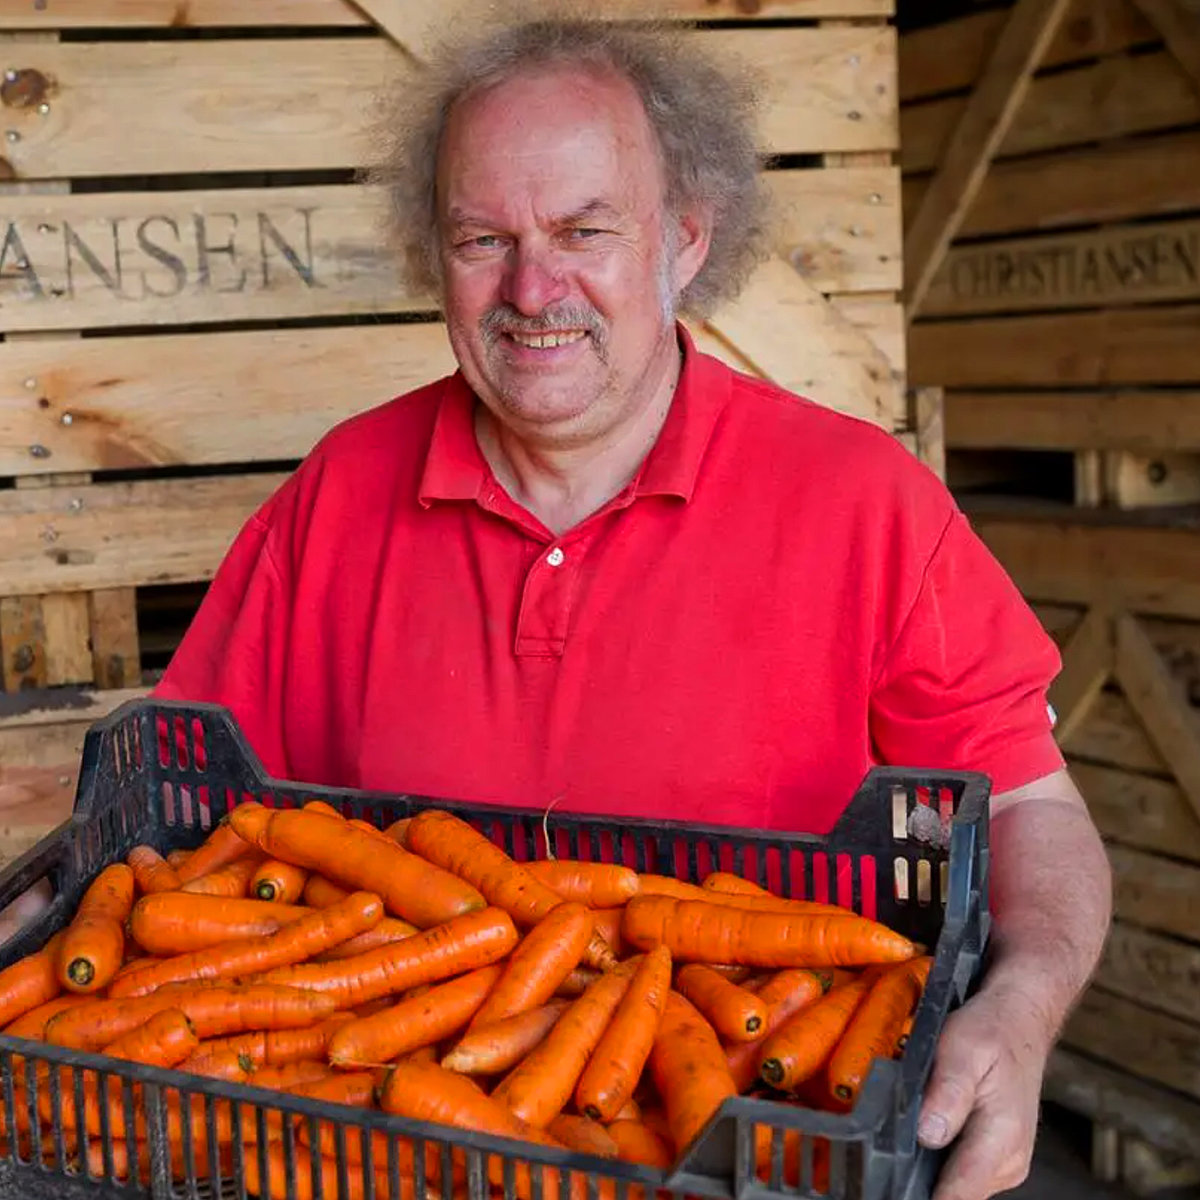 Farmer holding box of carrots from bed cultivation